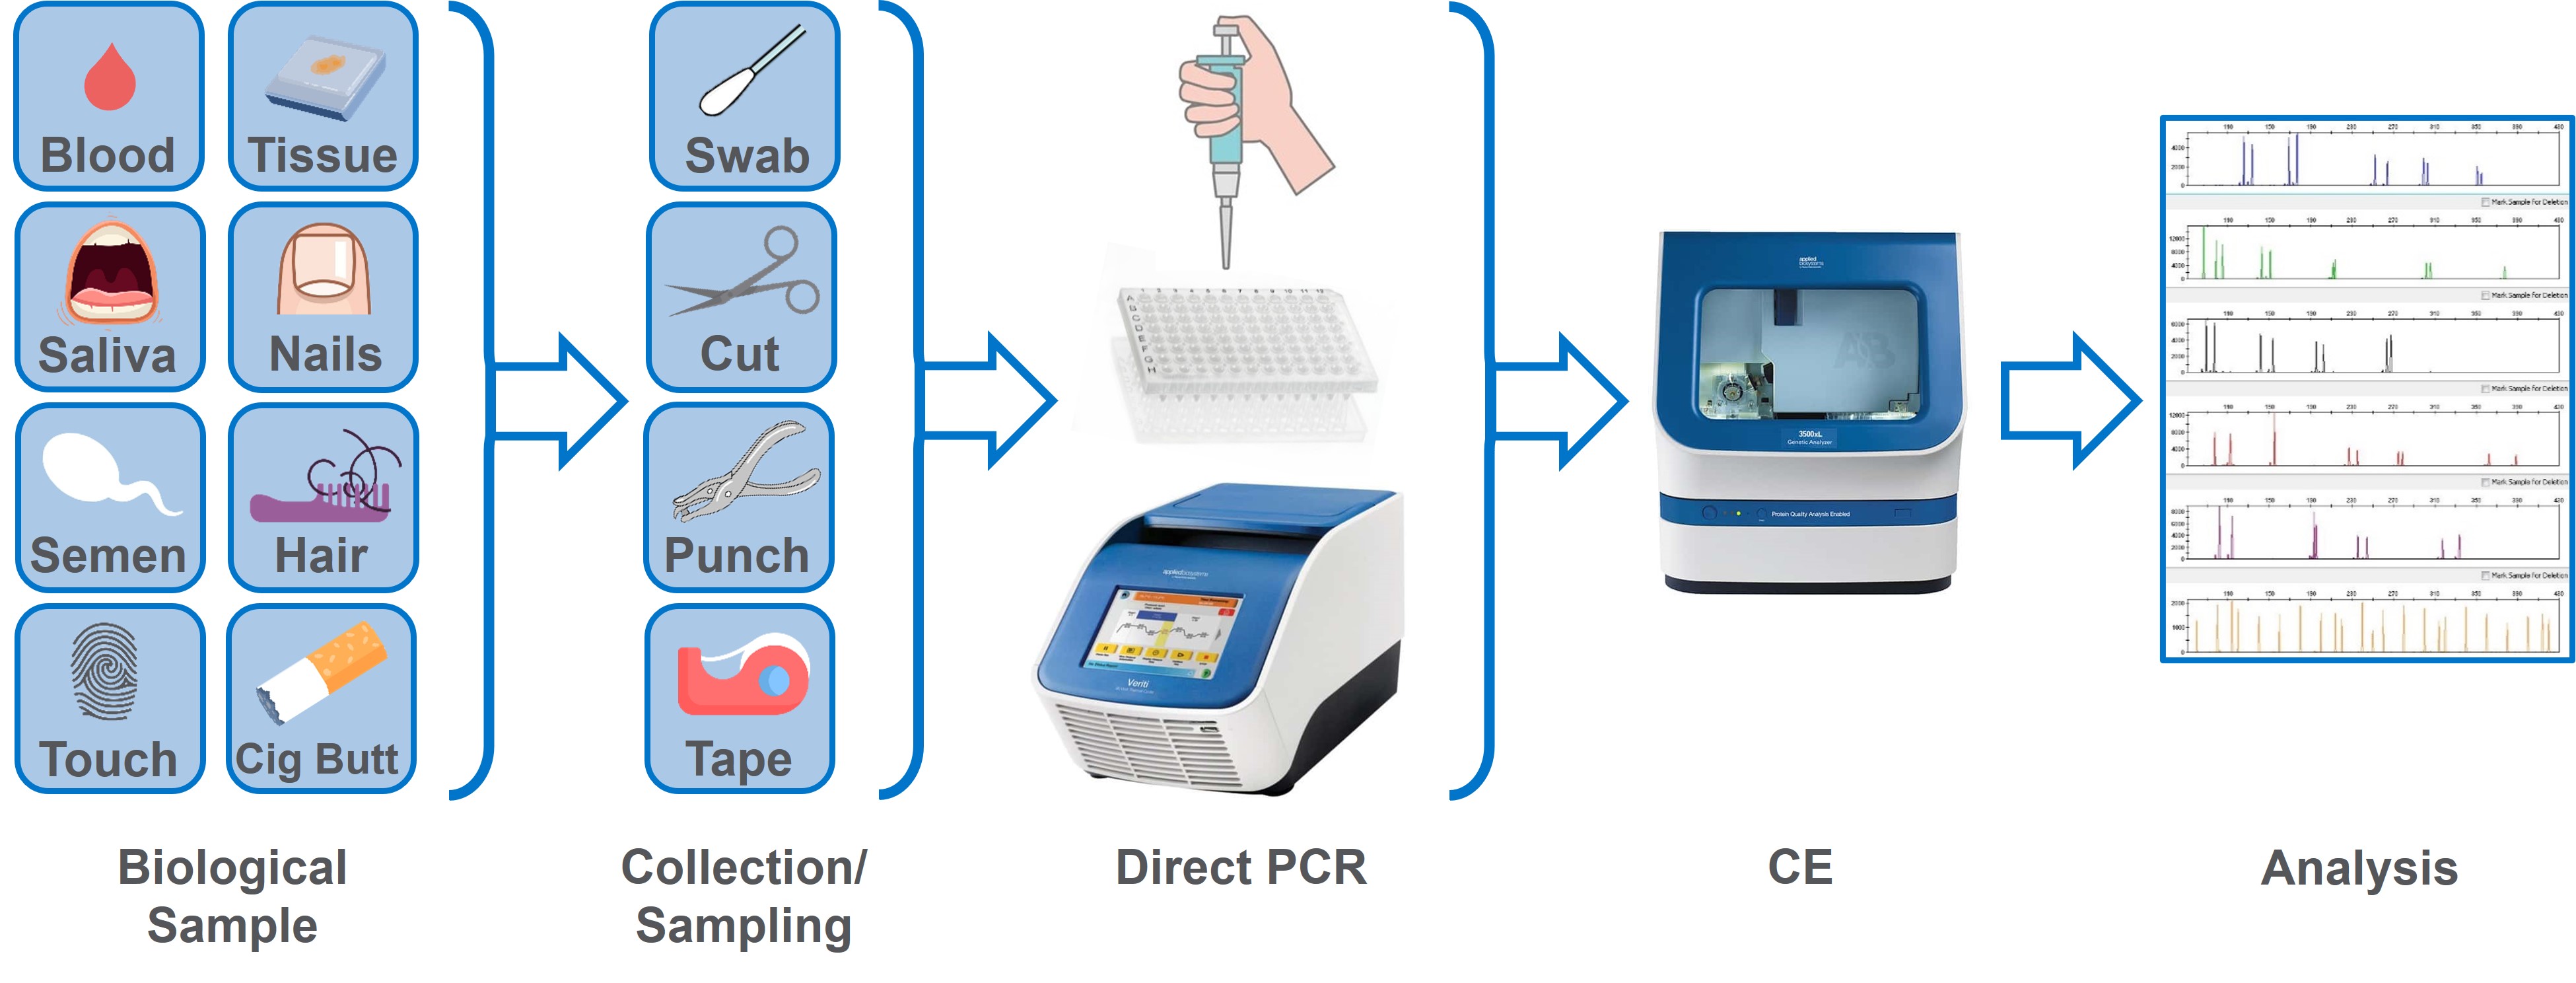 The direct PCR process: types of samples, collection and sampling methods, direct PCR in the thermocycler (for DNA amplification), capillary electrophoresis (CE) for DNA profiling, and analysis results.